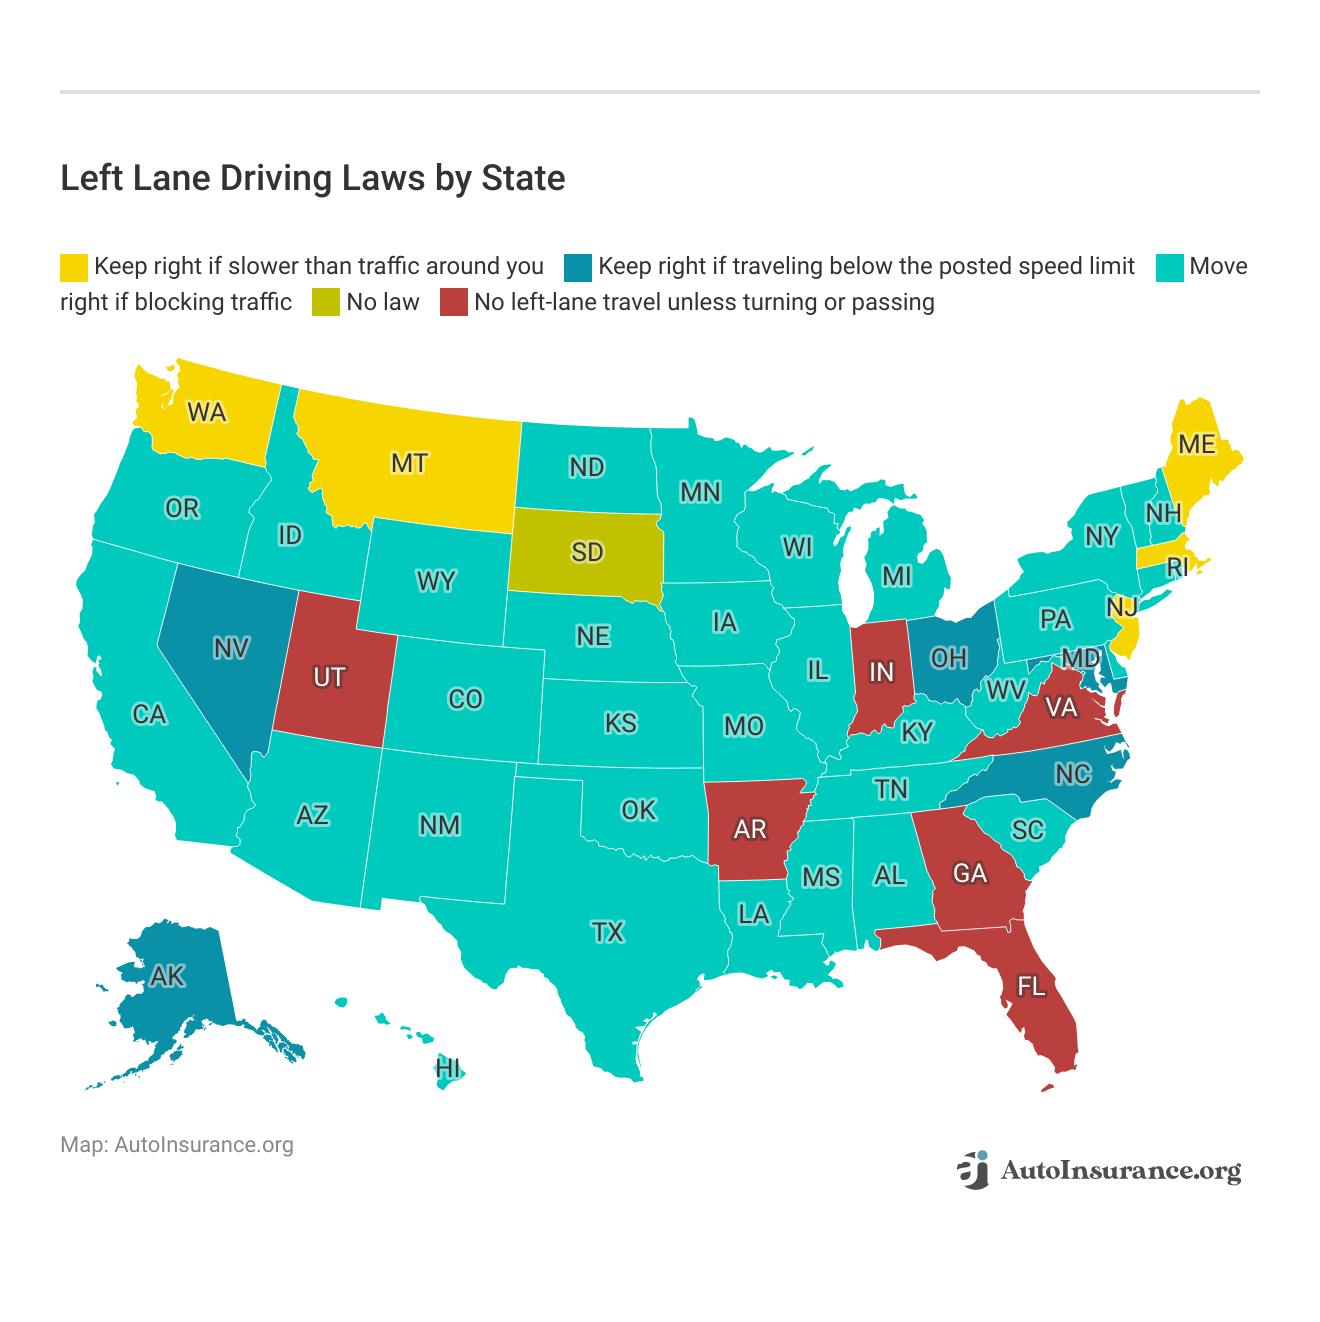 <h3>Left Lane Driving Laws by State</h3>